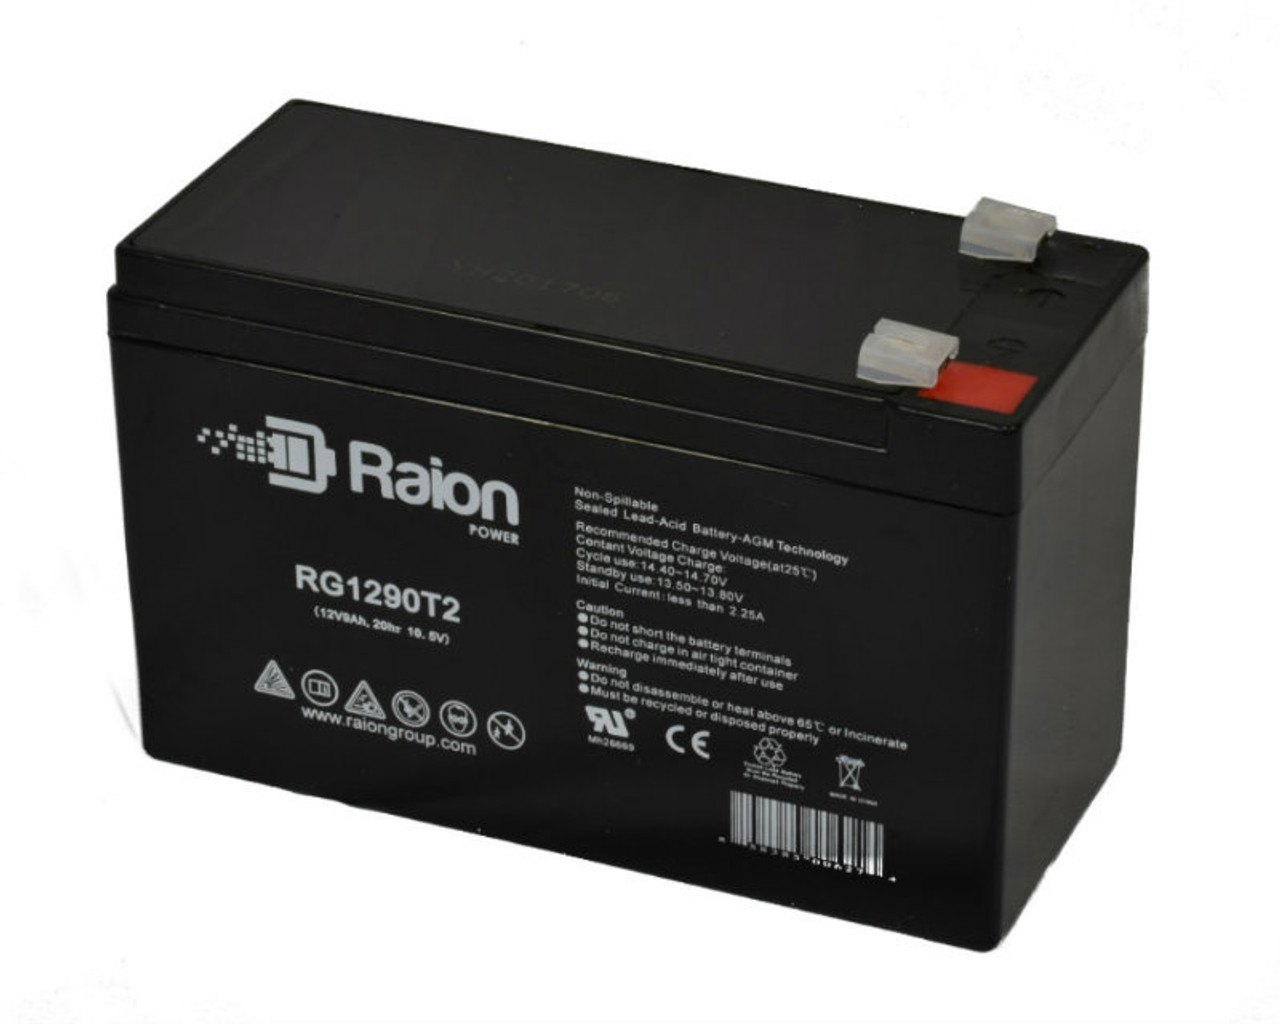 Raion Power Replacement RG1290T2 Battery for Potter Electric PFC-5002RG1290T2